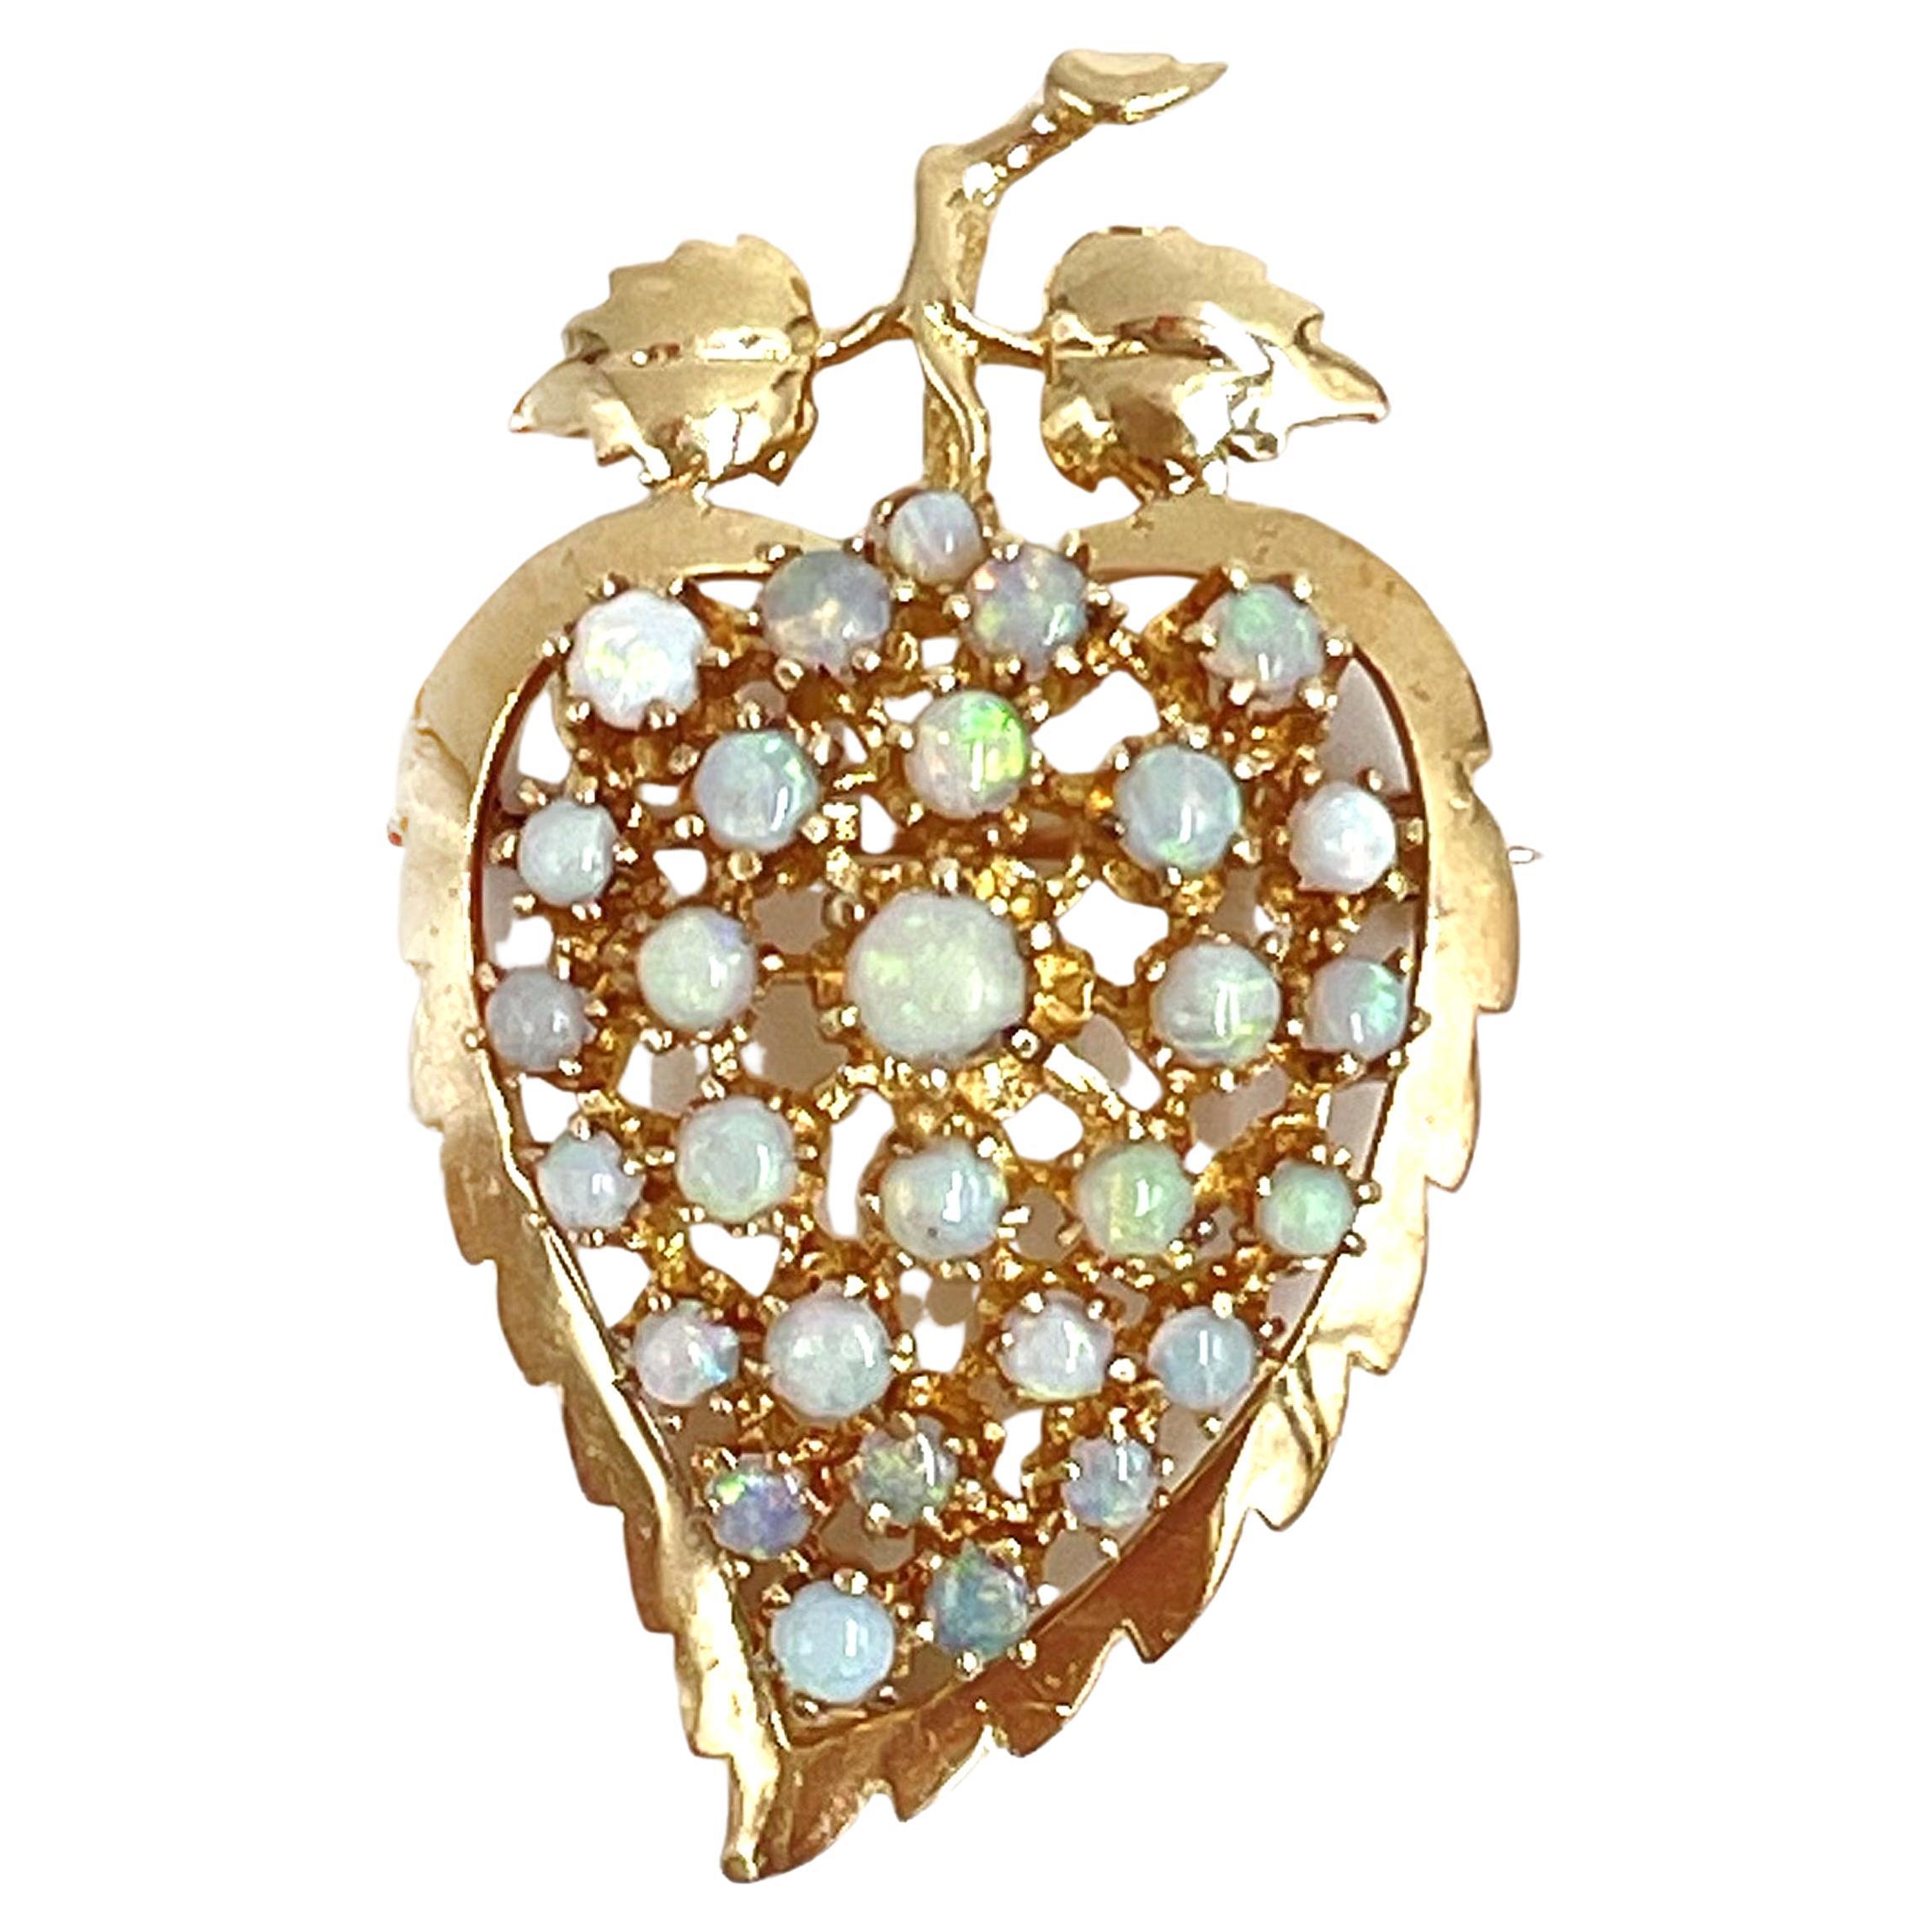 Preowned 14K Yellow Gold Brooch Pin / Pendant with Opals Circa 1960s For Sale